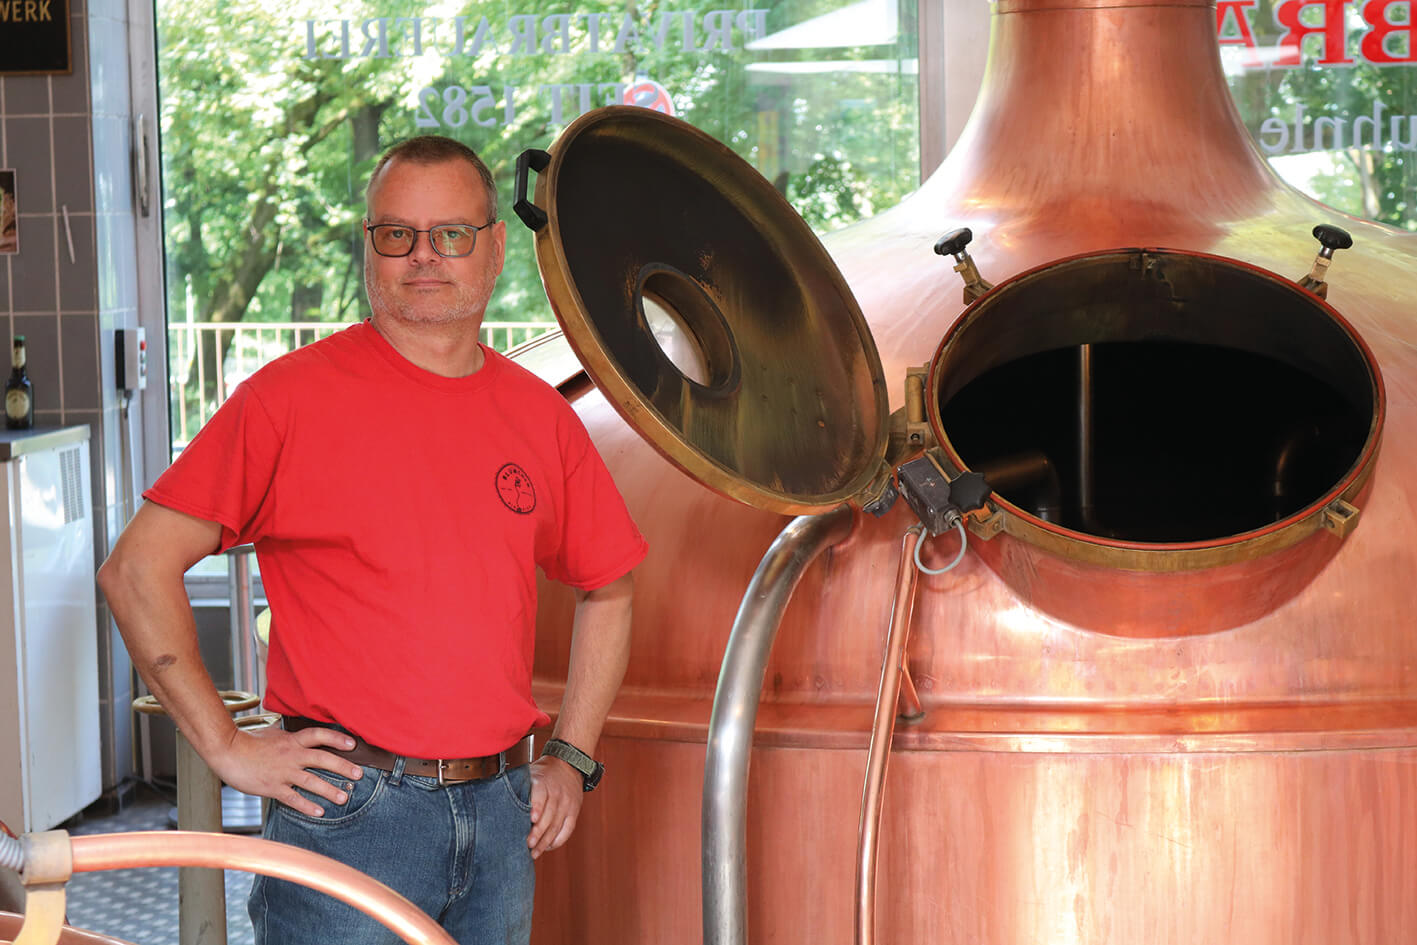 Thorbräu Augsburg: 50 years of craft brewing tradition with the Ziemann brewhouse